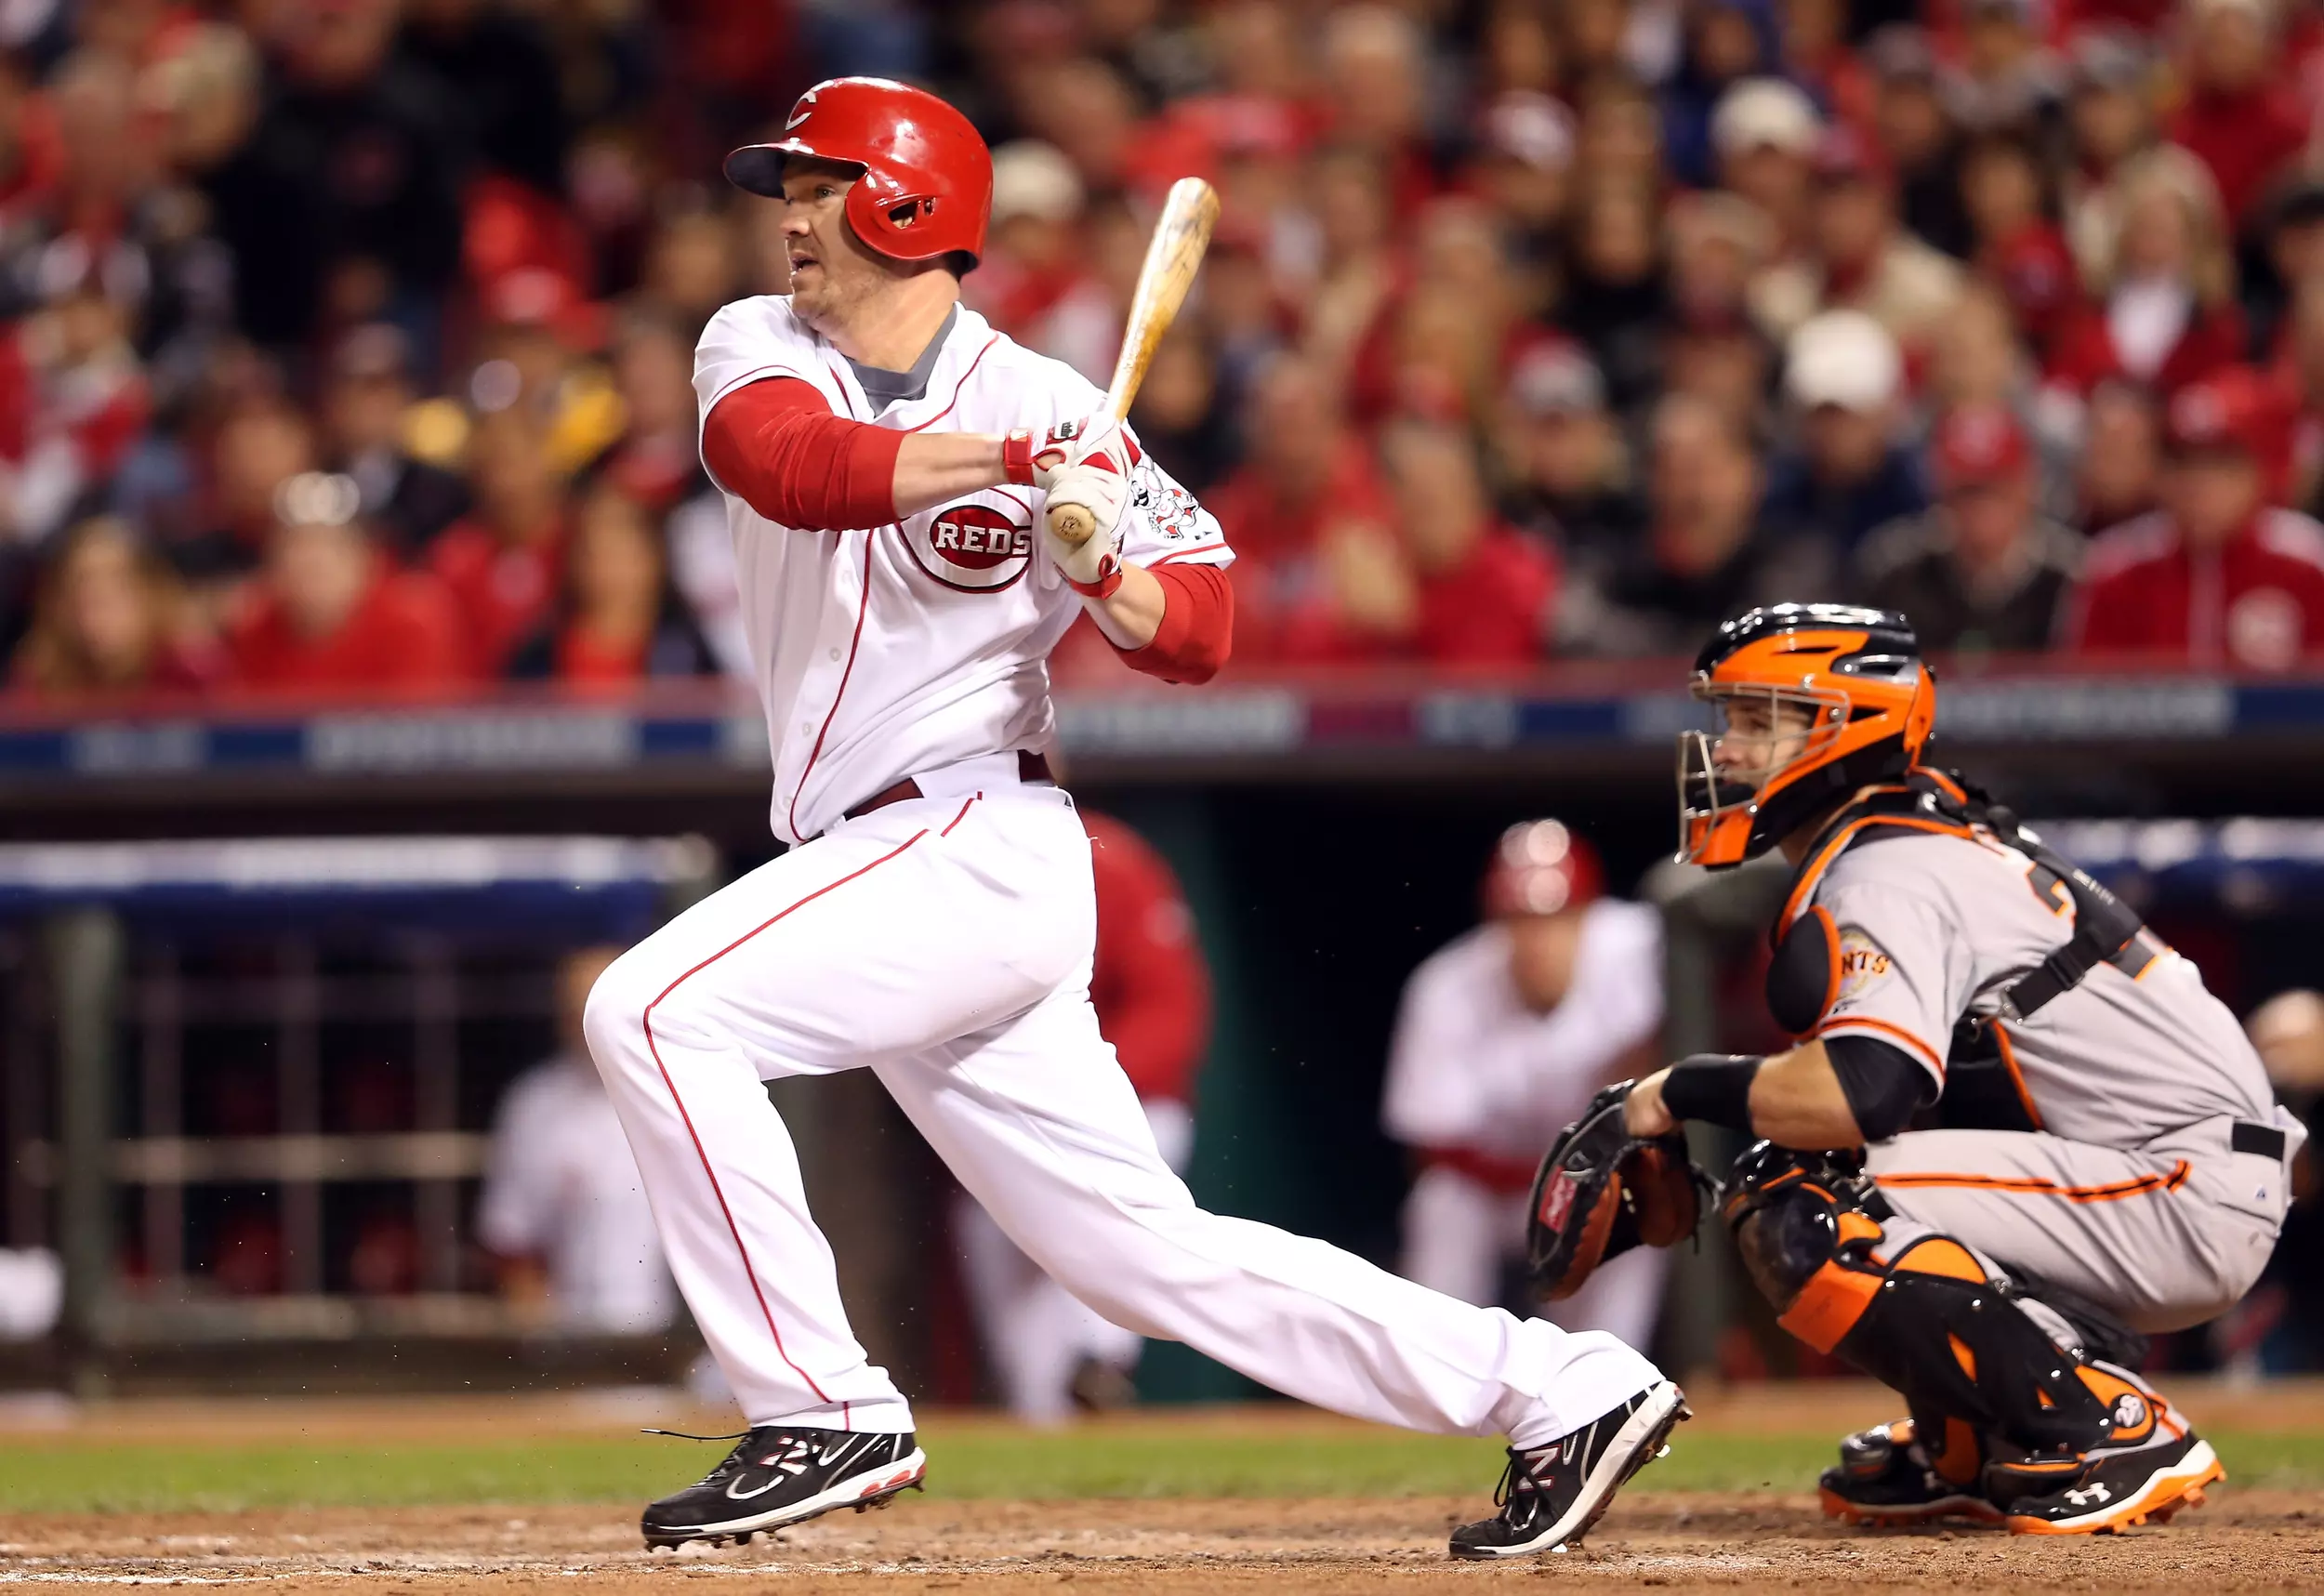 Reds open to a Scott Rolen return in reduced role 